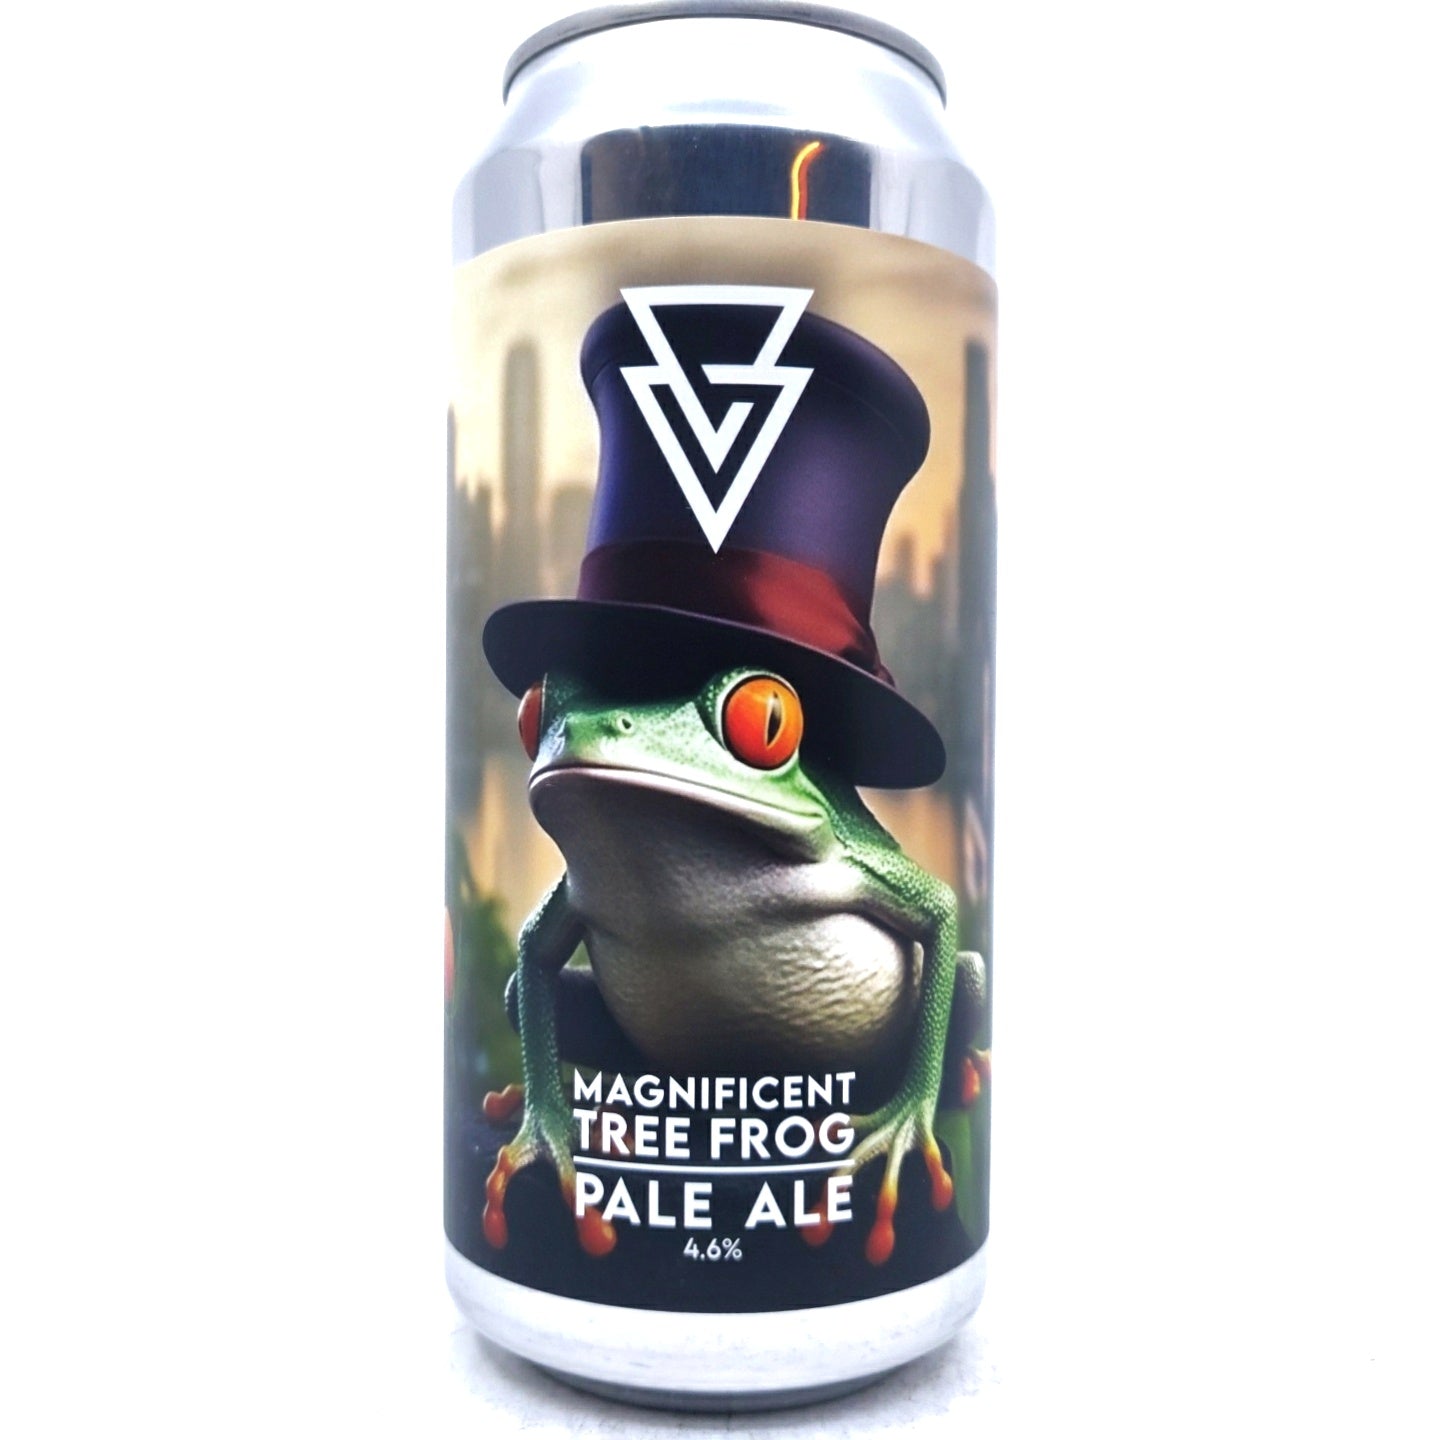 Azvex Brewing Magnificent Tree Frog Pale Ale 4.6% (440ml can)-Hop Burns & Black